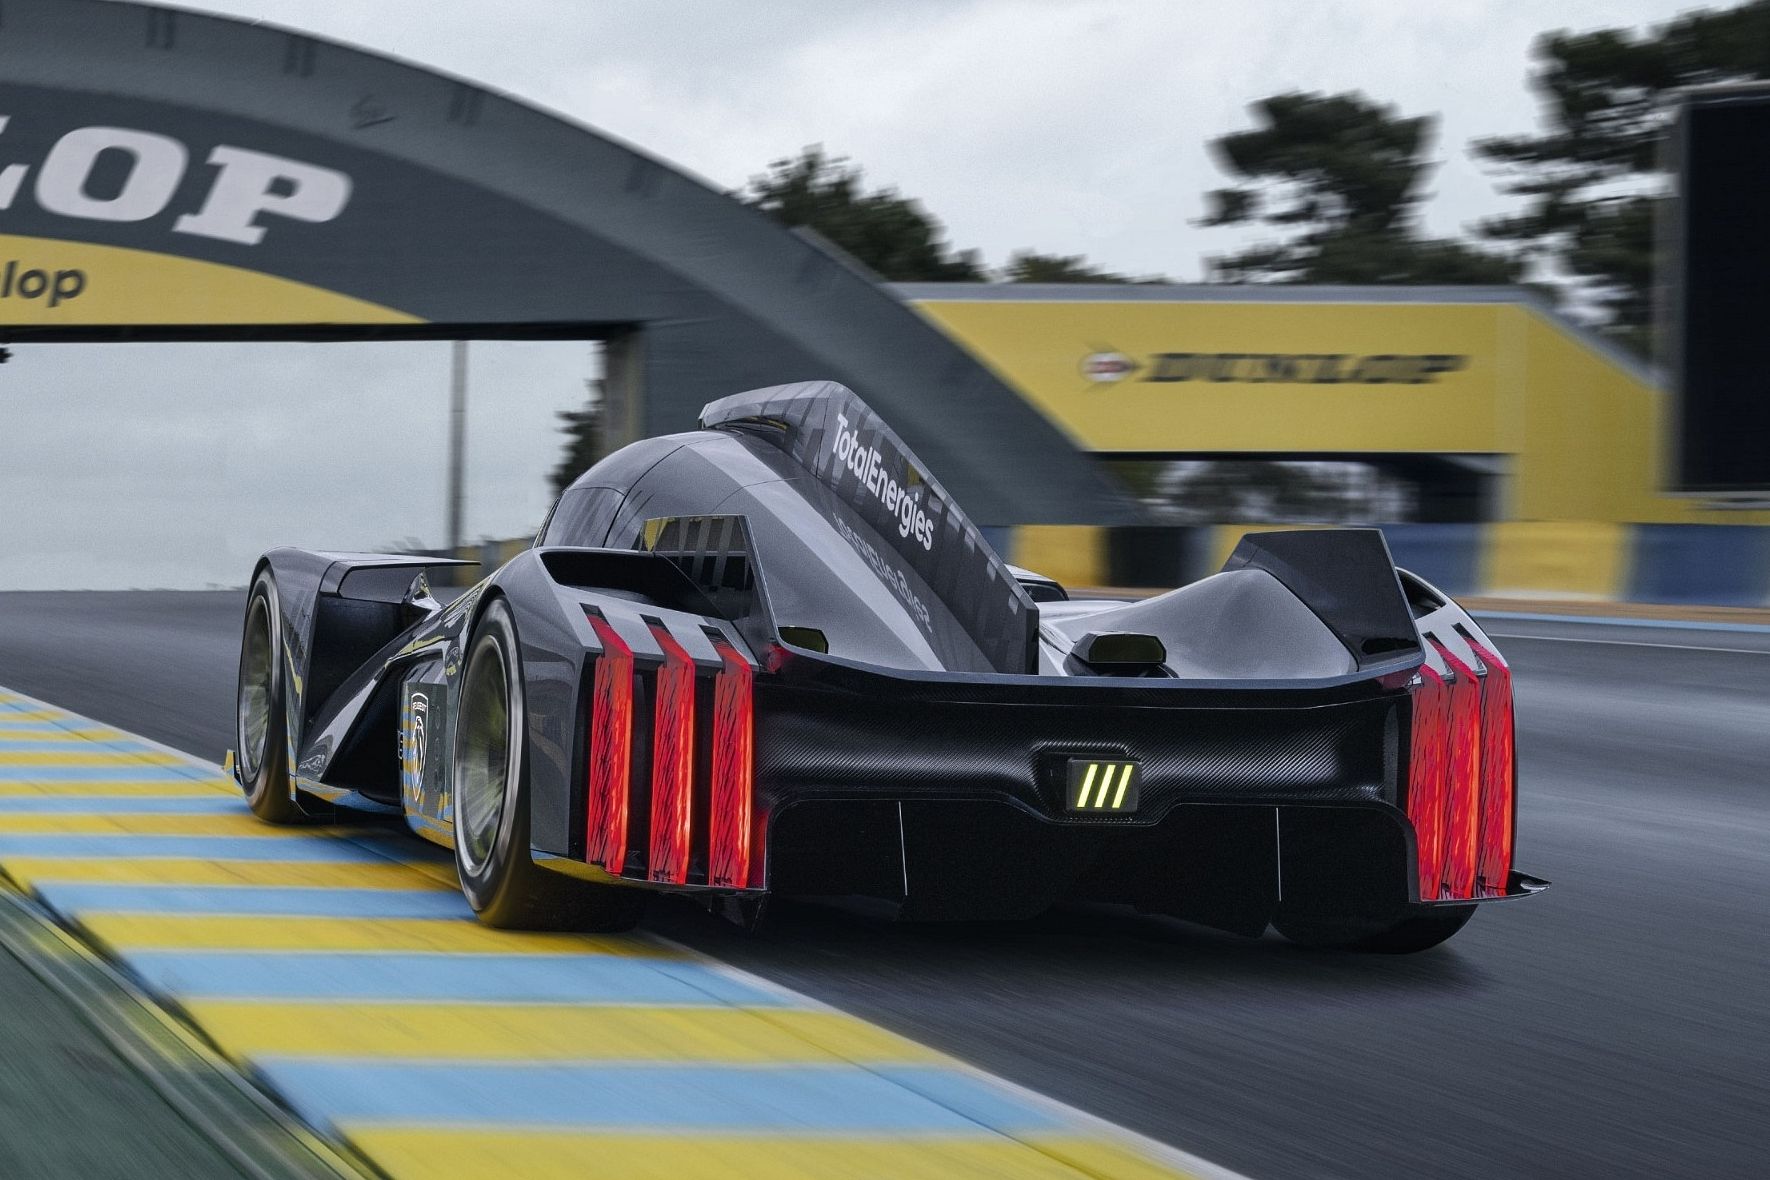 Peugeot's wingless 9X8 Le Mans Hypercar is innovative and